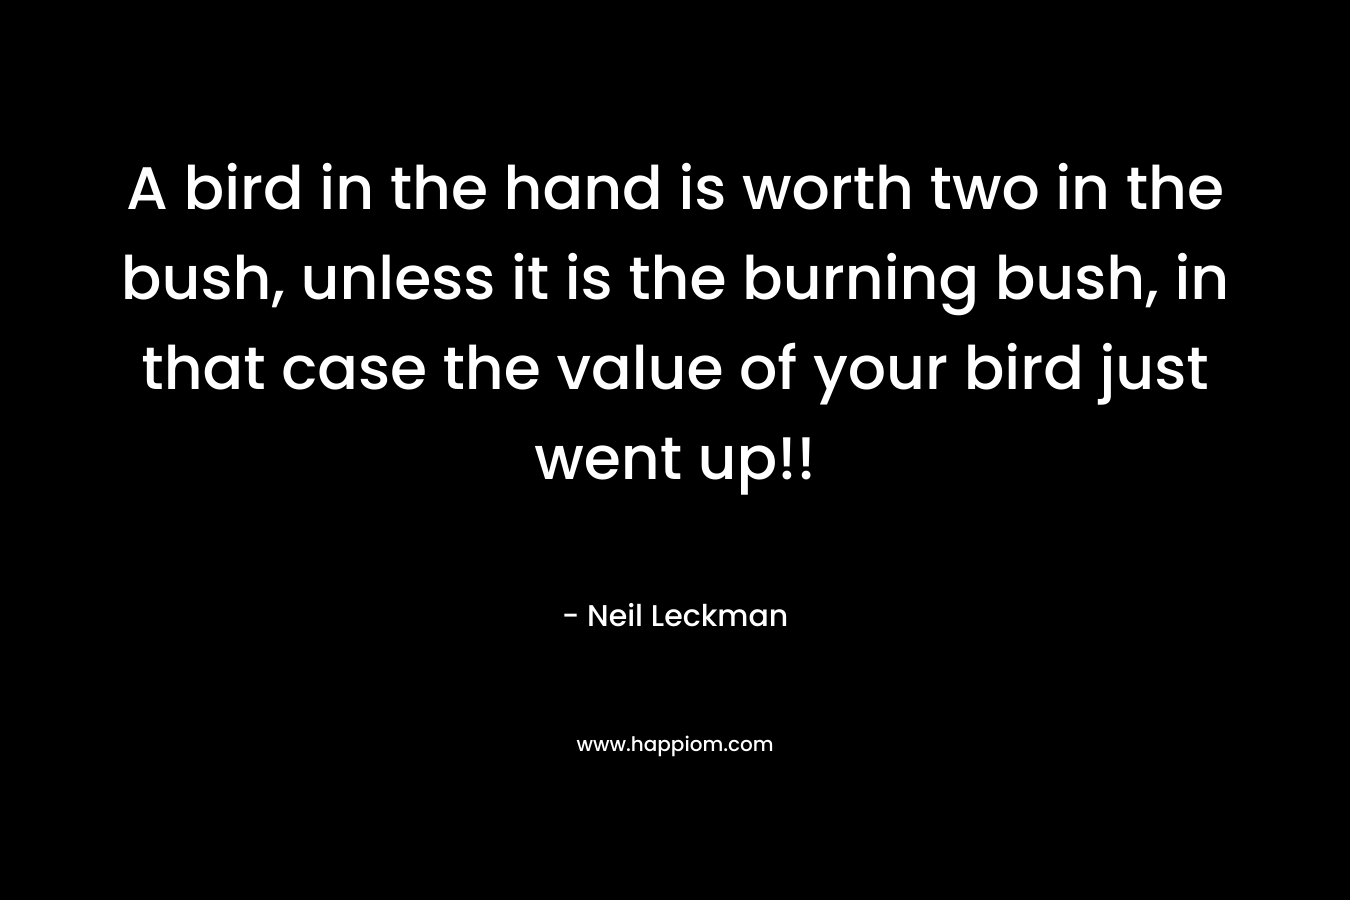 A bird in the hand is worth two in the bush, unless it is the burning bush, in that case the value of your bird just went up!!